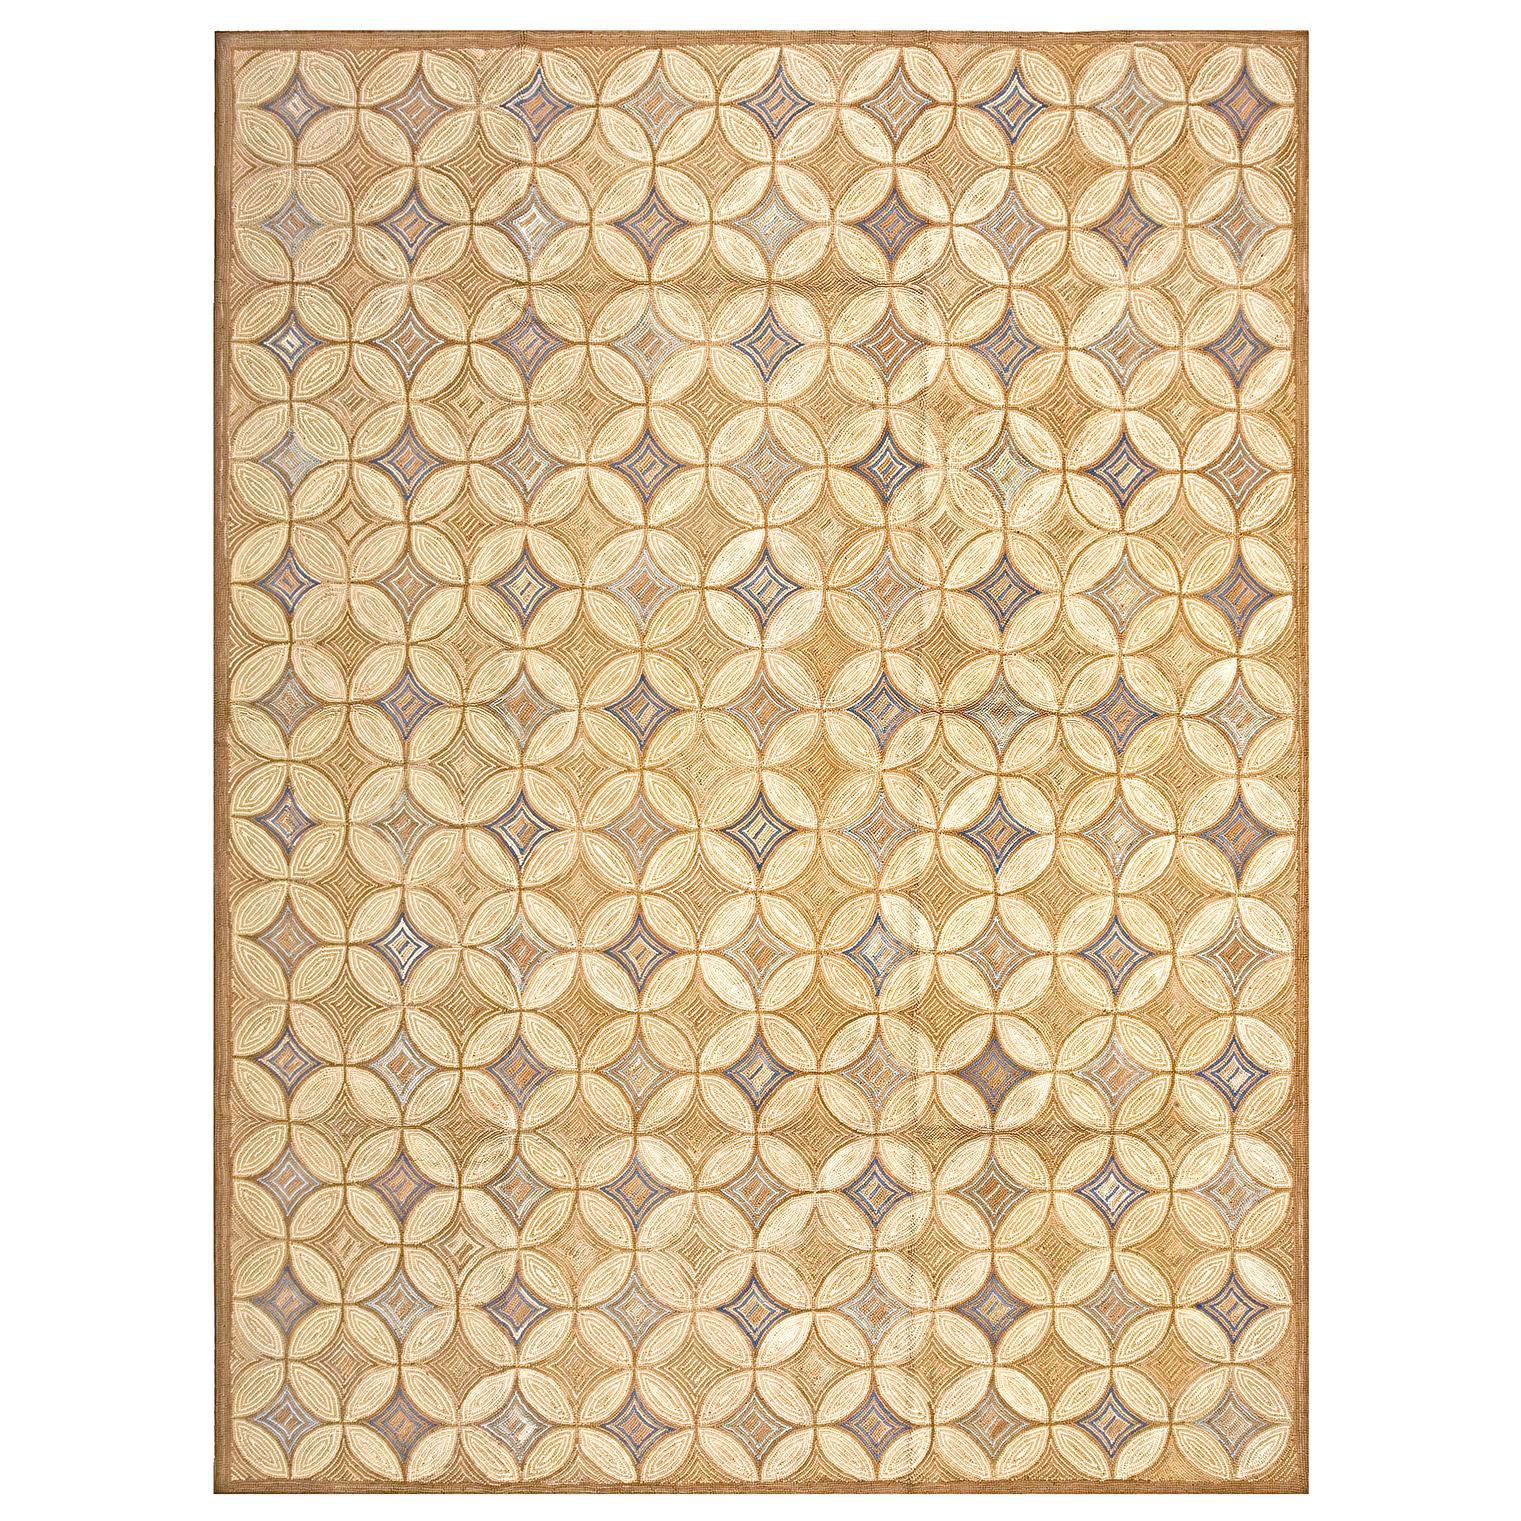 Contemporary Handmade Cotton Hooked Rug ( 8' x 10' - 244 x 305 cm ) For Sale